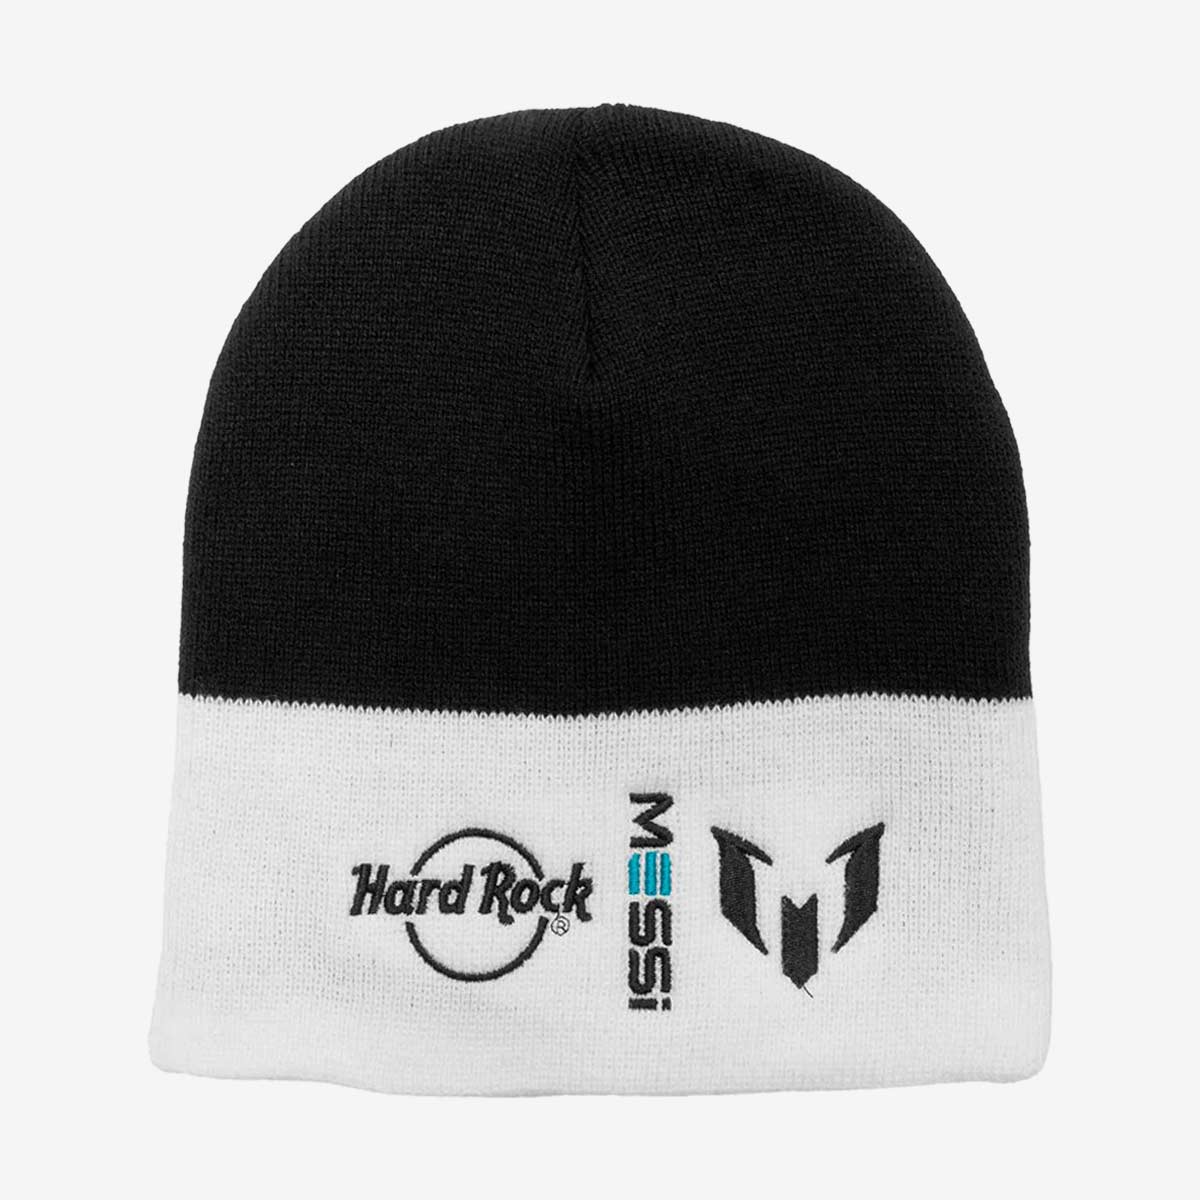 Messi x Hard Rock Beanie in Black and White image number 1